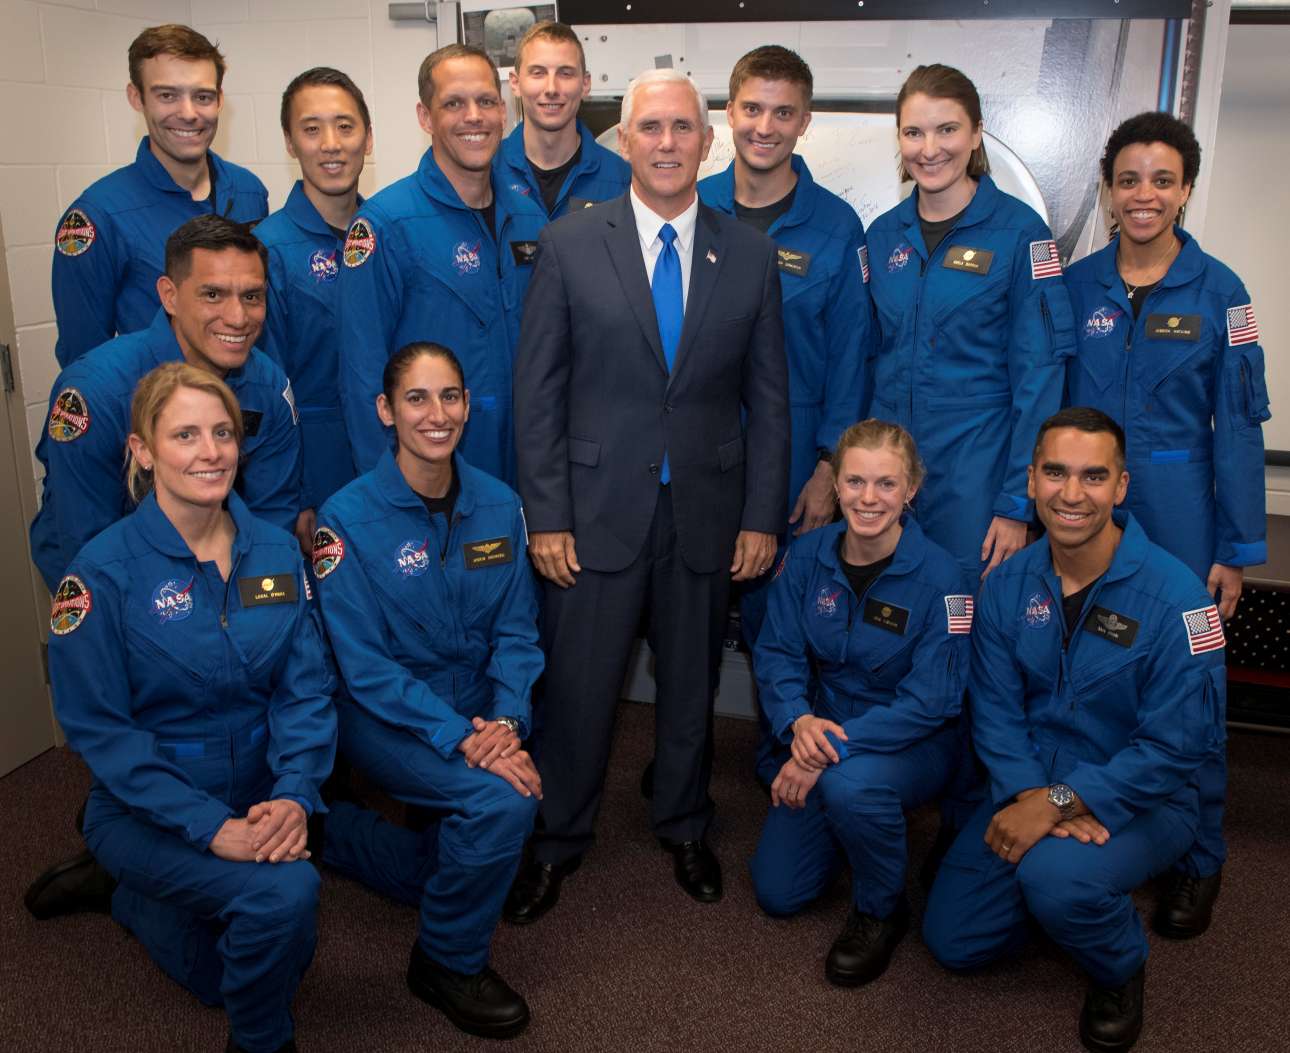 2017-06-07T215329Z_226479696_RC164F7A0A10_RTRMADP_3_SPACE-ASTRONAUTS-PENCE